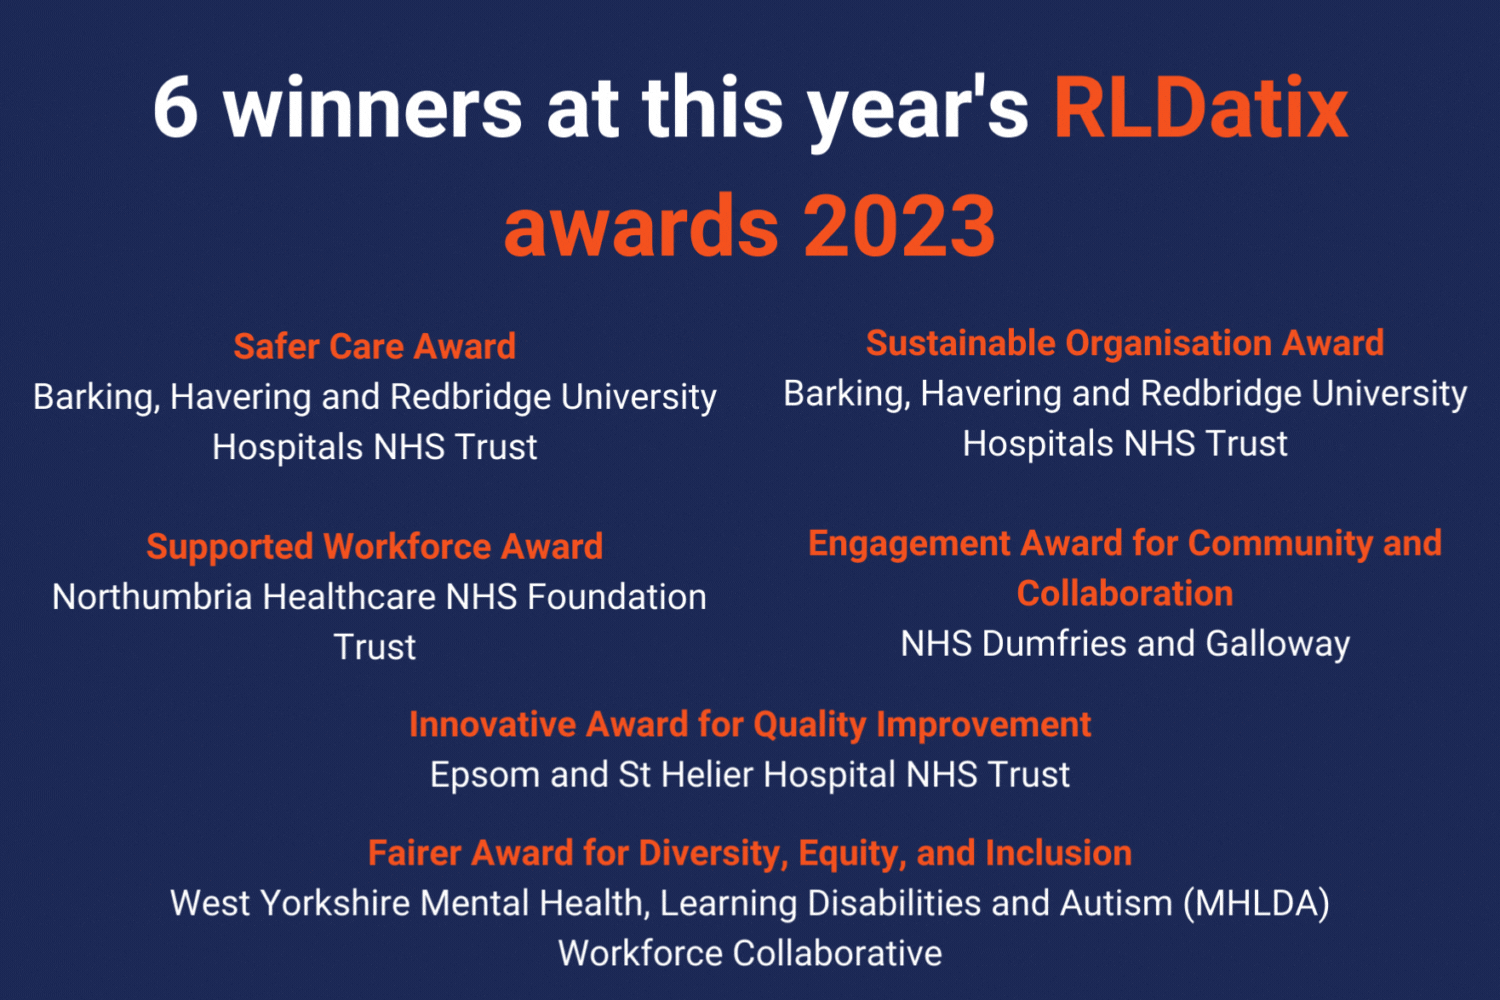 6 winners at this year's RLDatix awards 2023 Safer Care Award Barking, Havering and Redbridge University Hospitals NHS Trust Supported Workforce Award Northumbria Healthcare NHS Foundation Trust Sustainable Organisation Award Barking, Havering and Redbridge University Hospitals NHS Trust Engagement Award for Community and Collaboration NHS Dumfries and Galloway Innovative Award for Quality Improvement Epsom and St Helier Hospital NHS Trust Fairer Award for Diversity, Equity, and Inclusion West Yorkshire Mental Health, Learning Disabilities and Autism (MHLDA) Workforce Collaborative